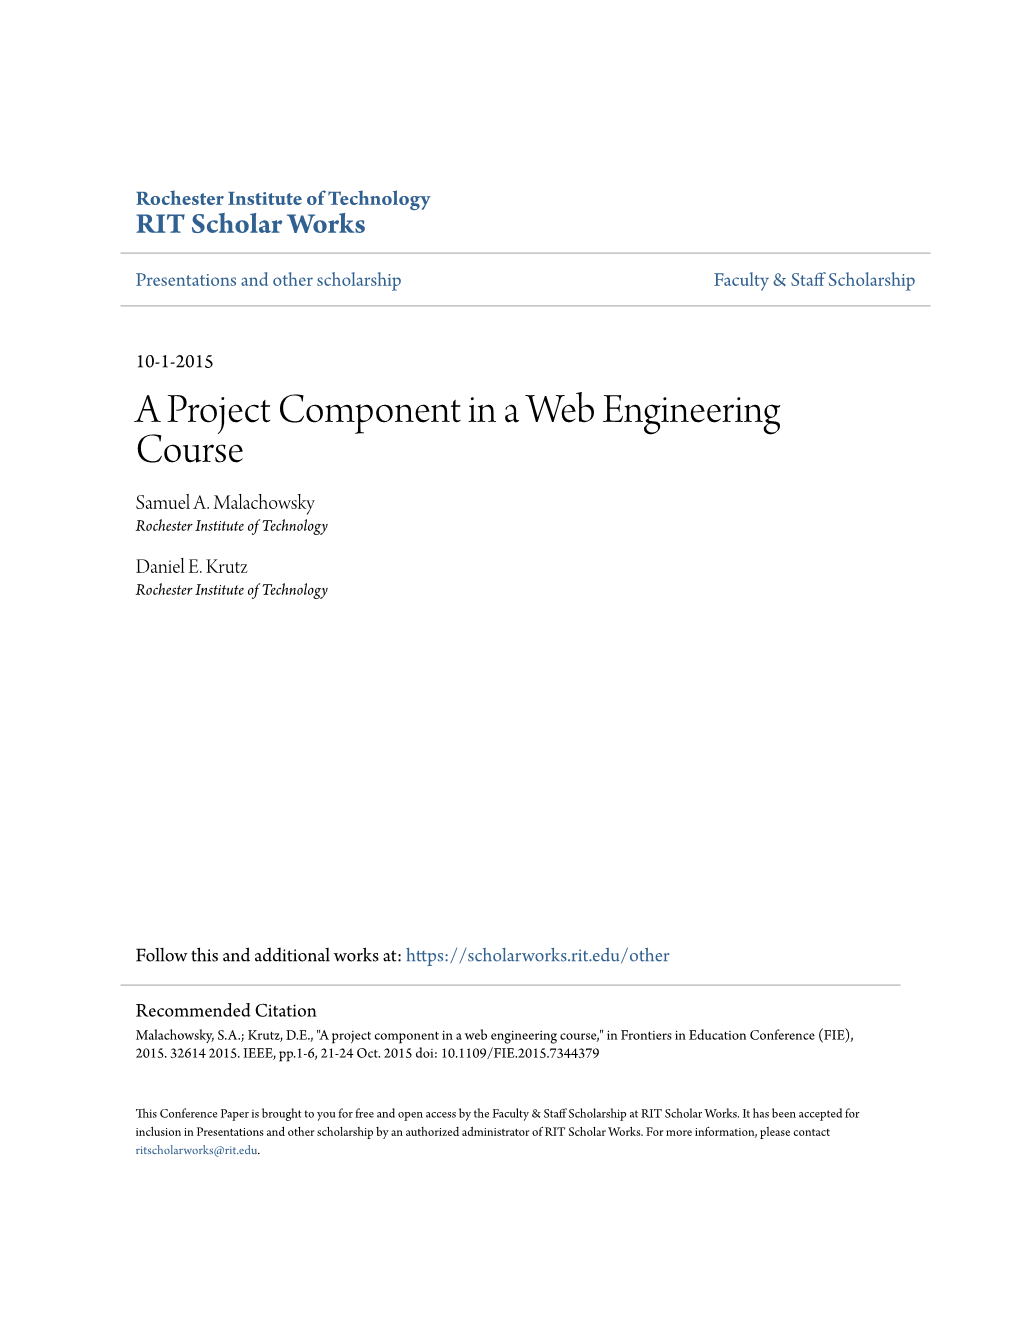 A Project Component in a Web Engineering Course Samuel A